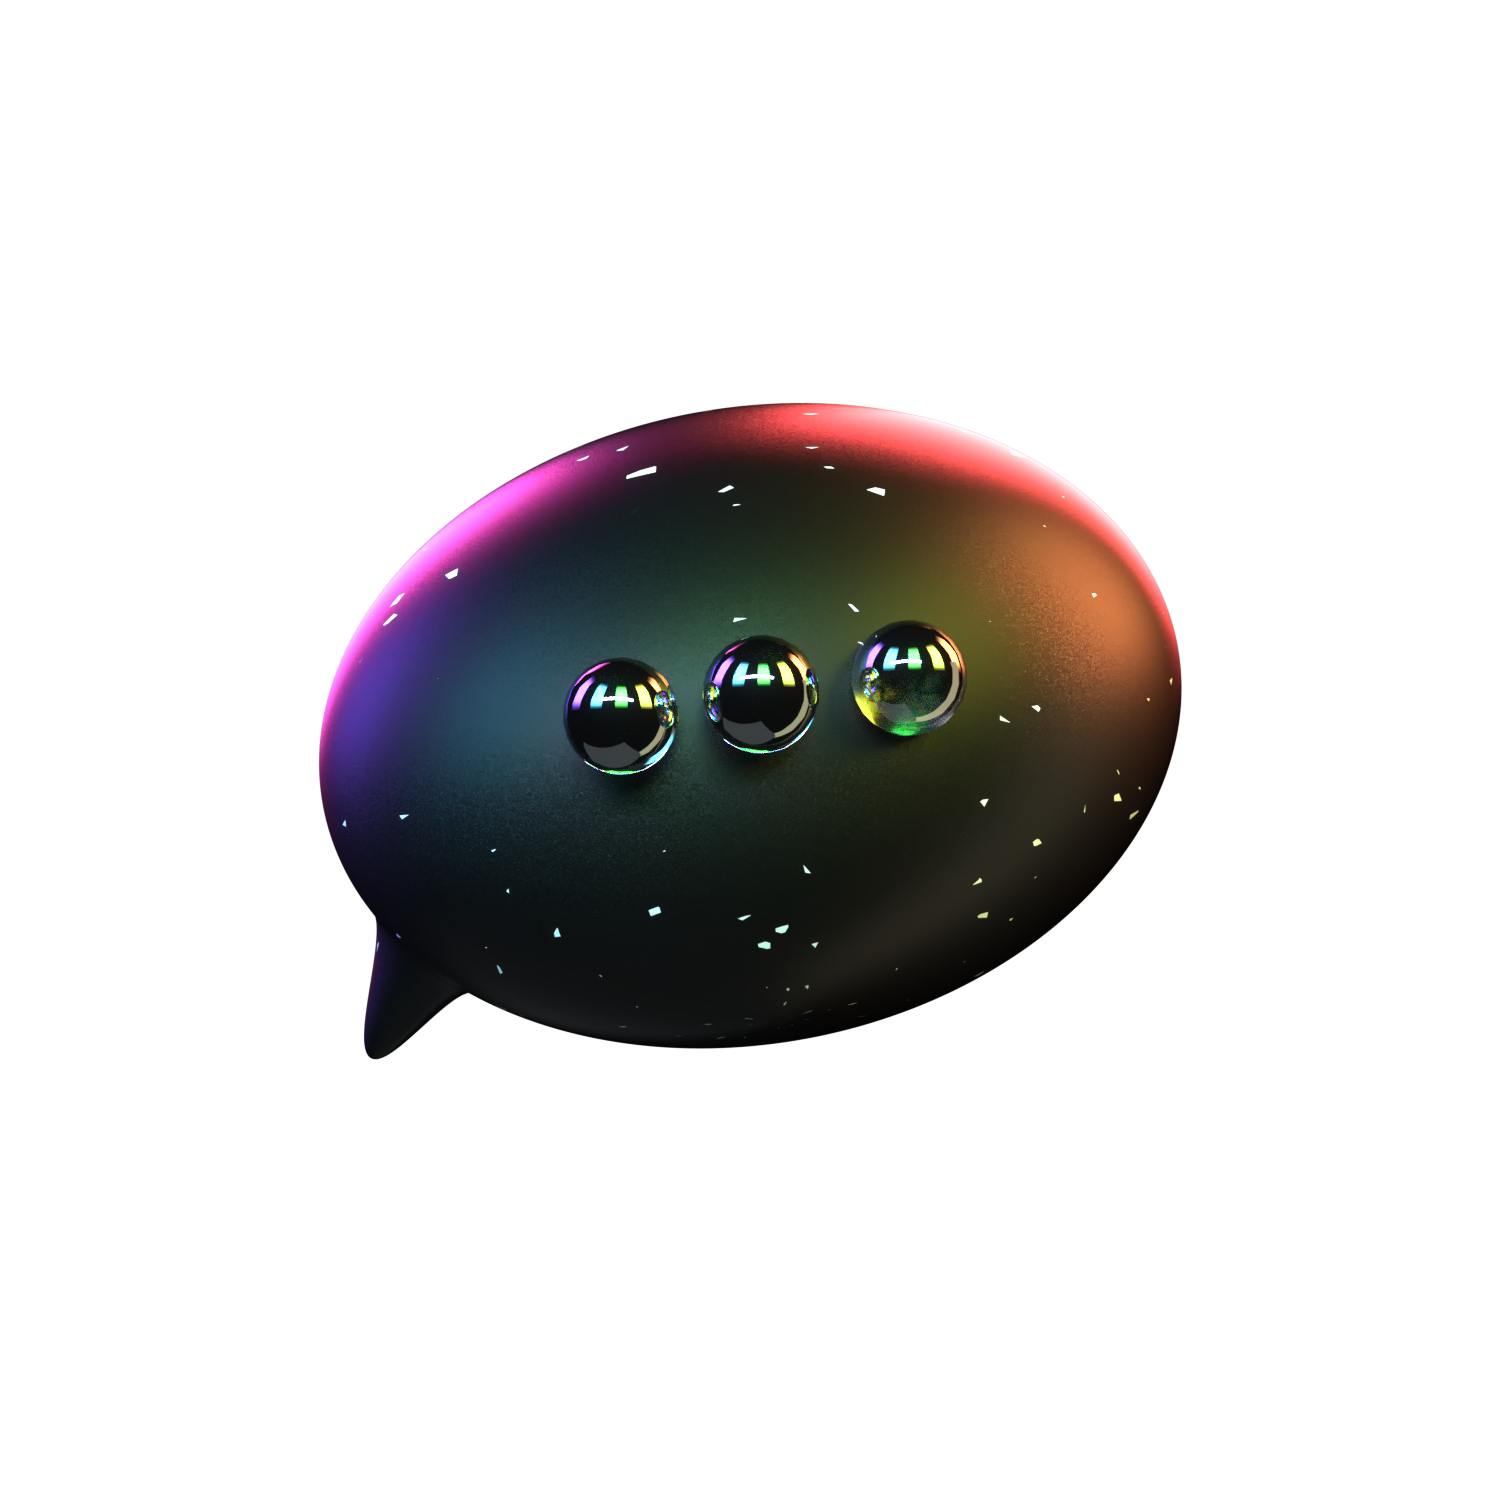 Image of a chat bubble.